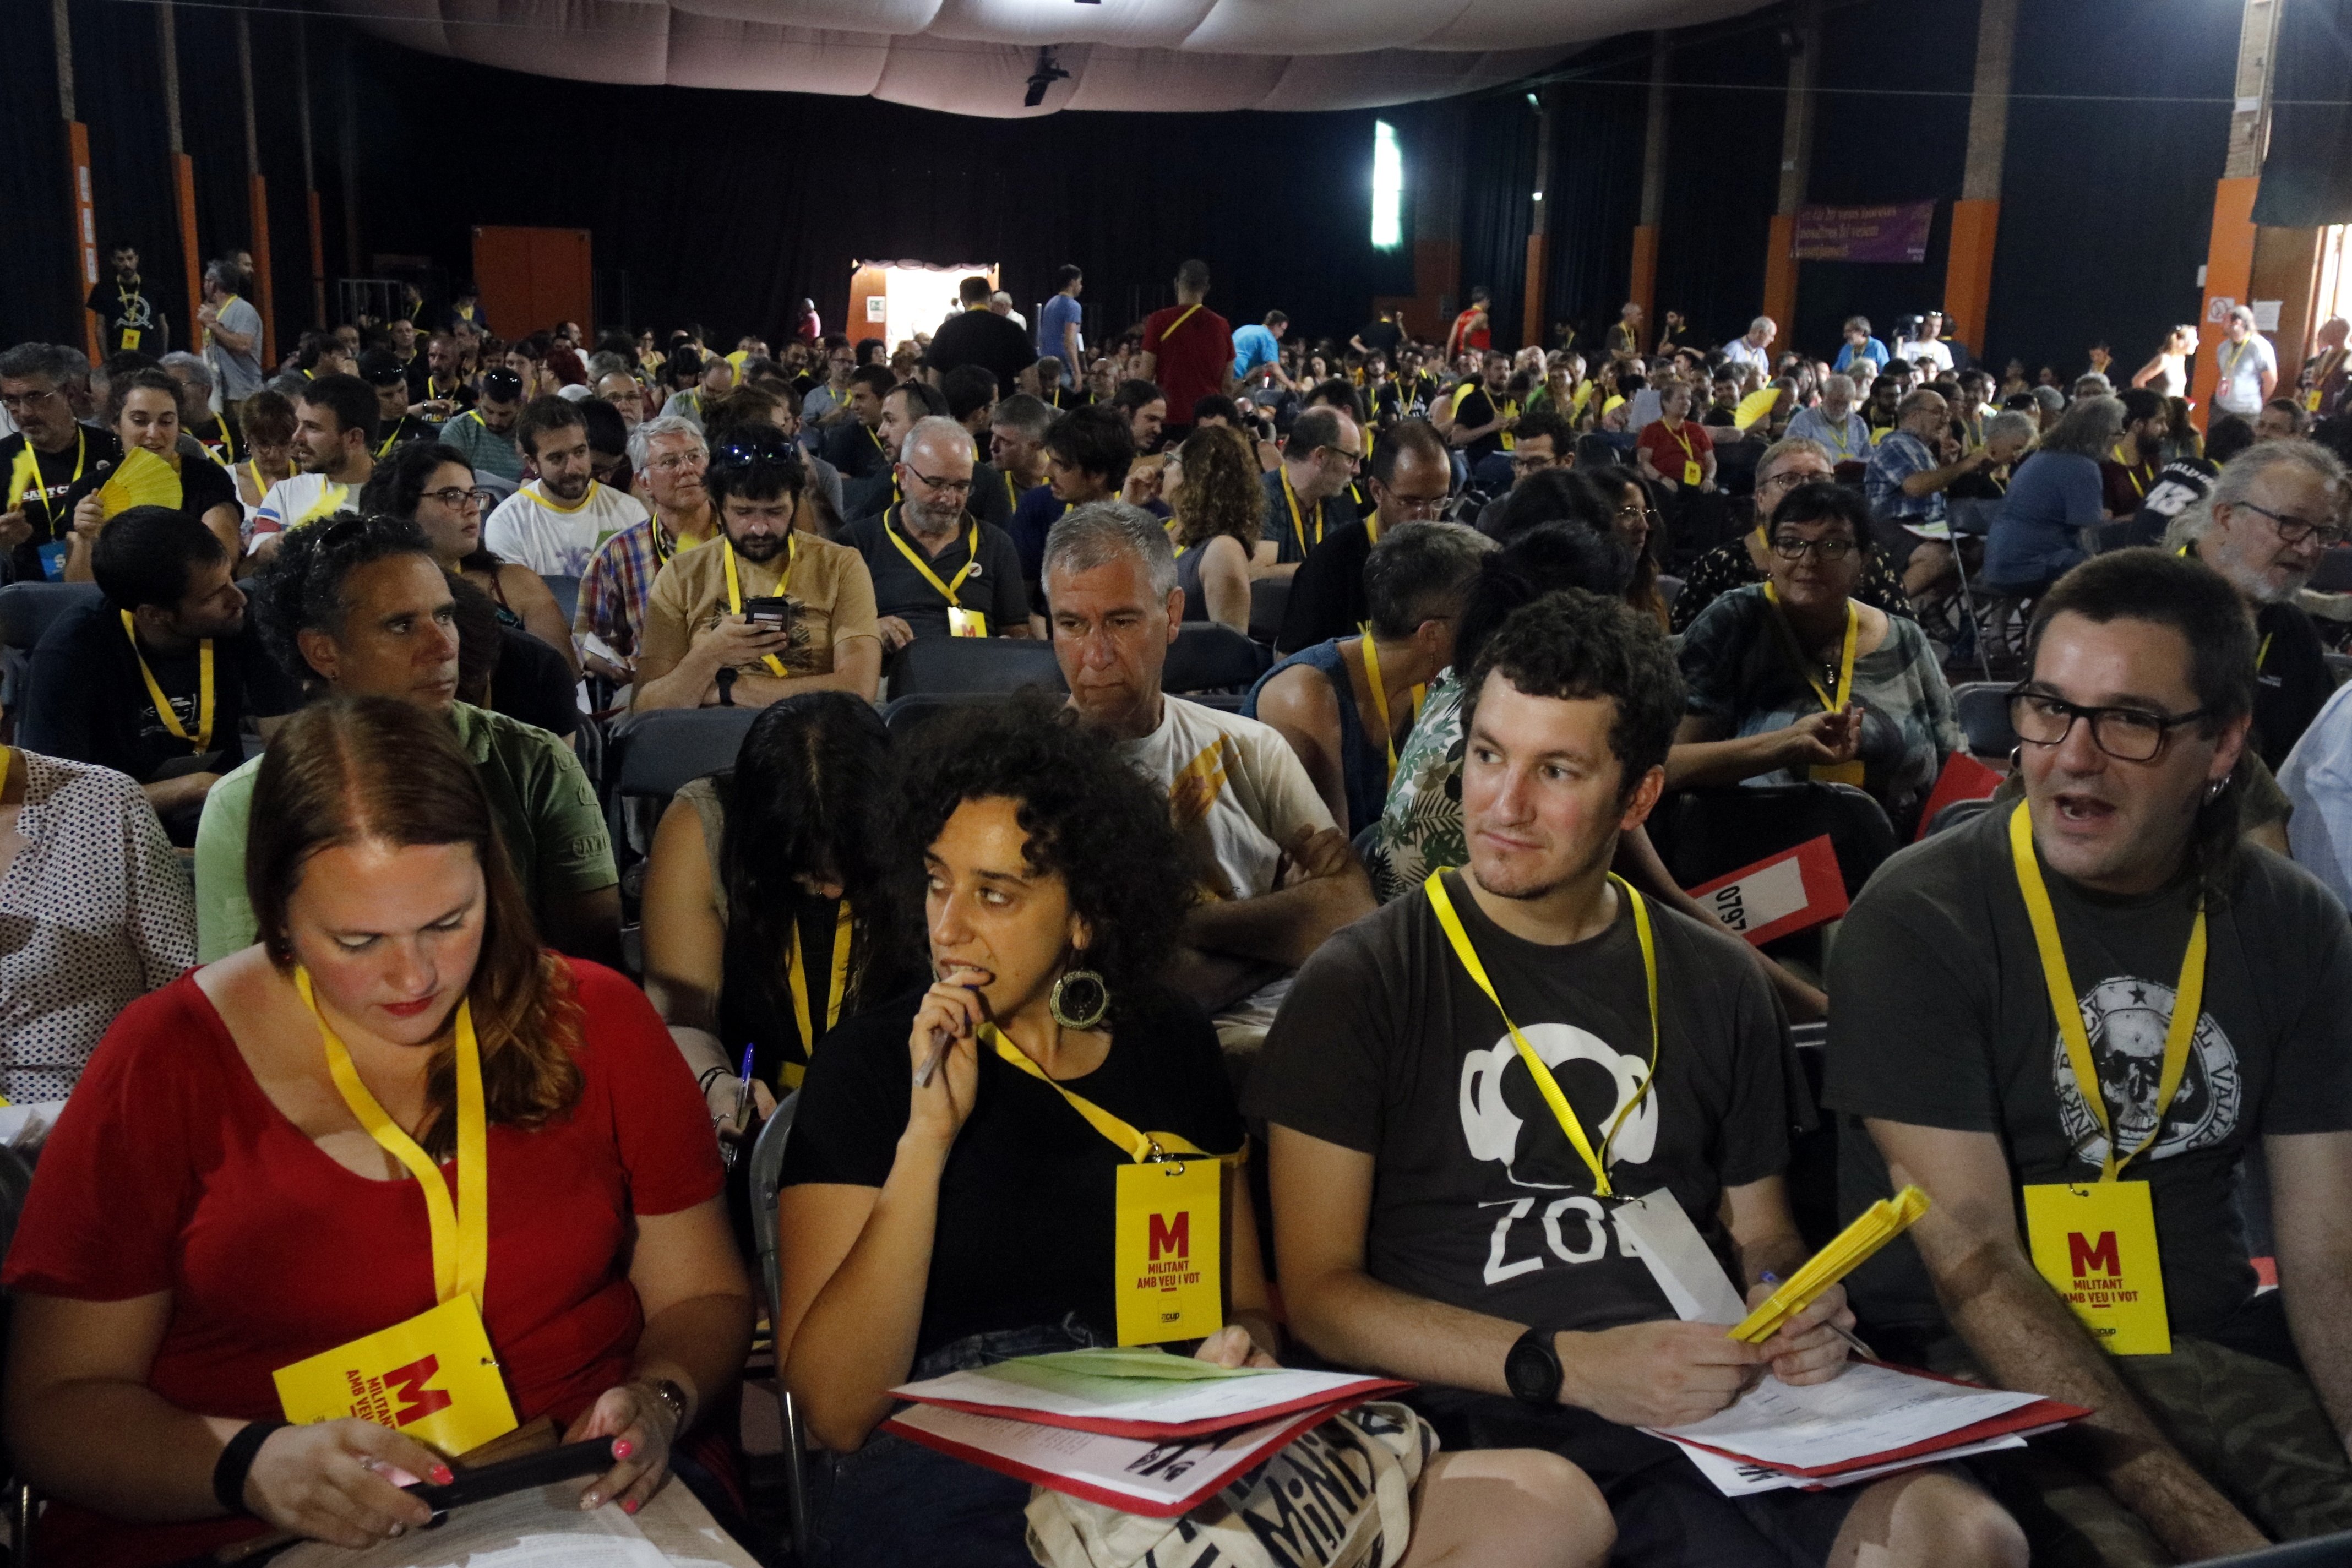 The CUP dissects itself: left-wing Catalan independence party re-tunes strategy